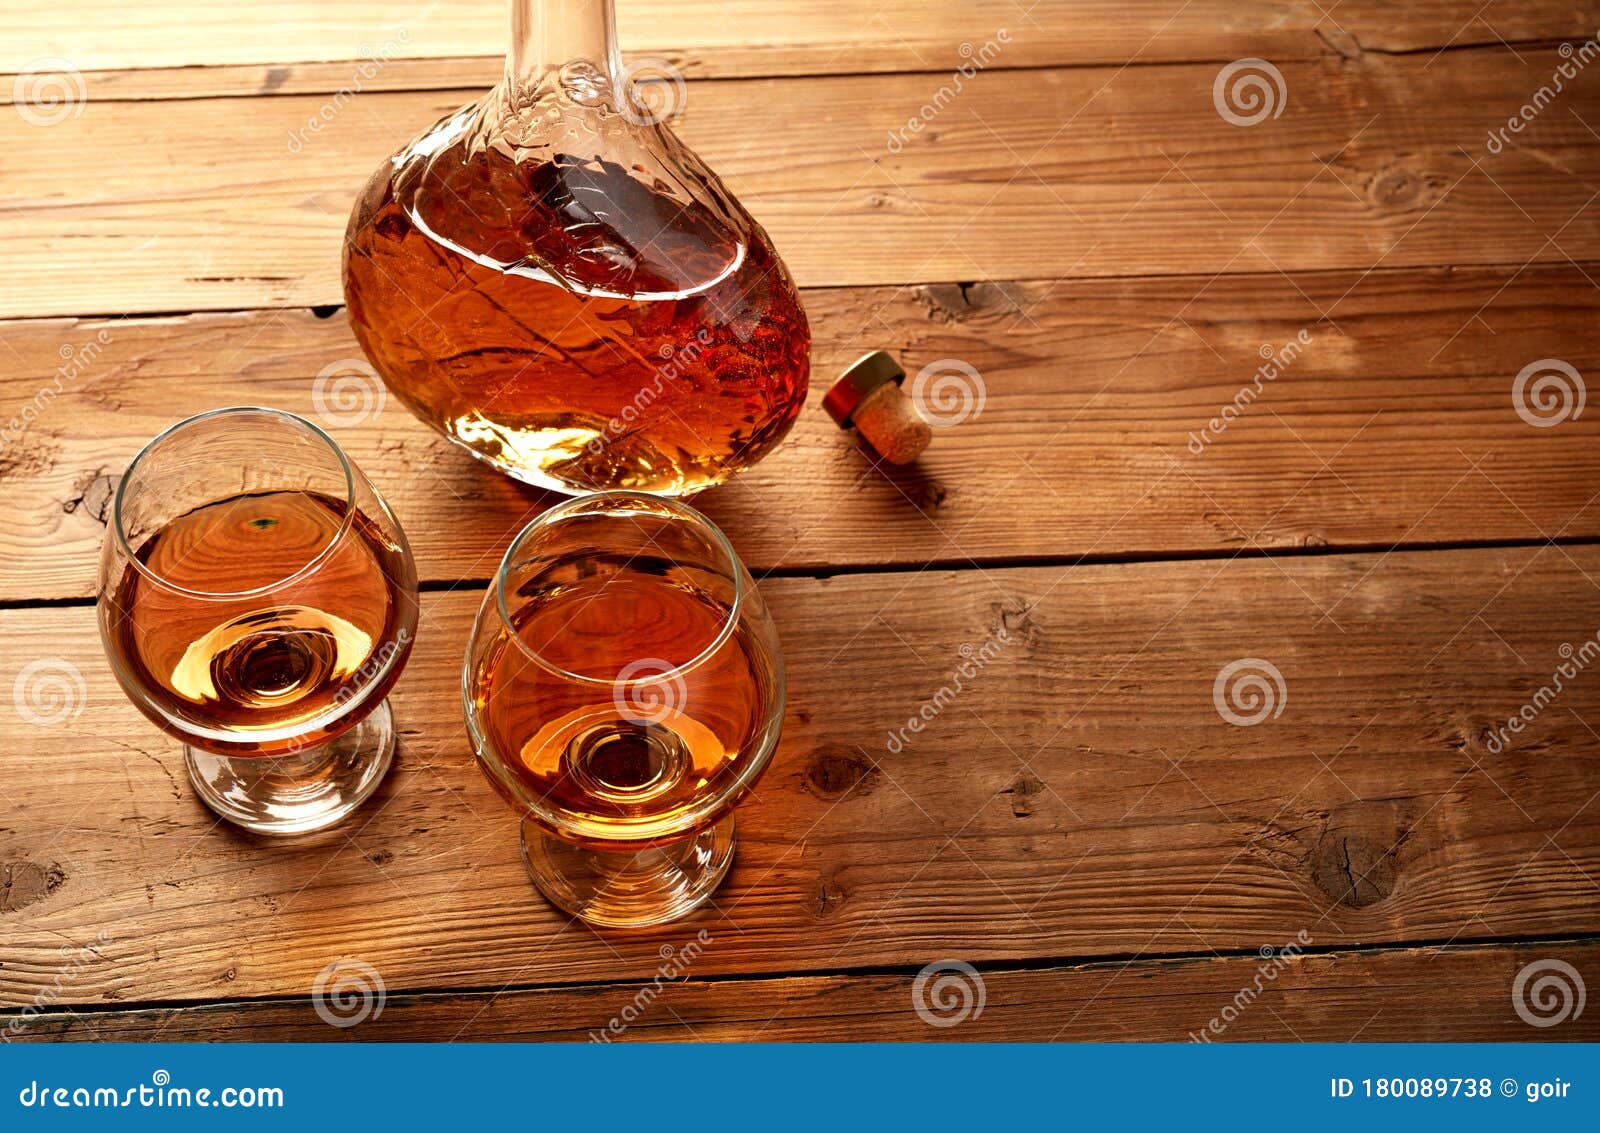 snatch Laws and regulations scarf Cognac glasses and bottle stock photo. Image of design - 180089738